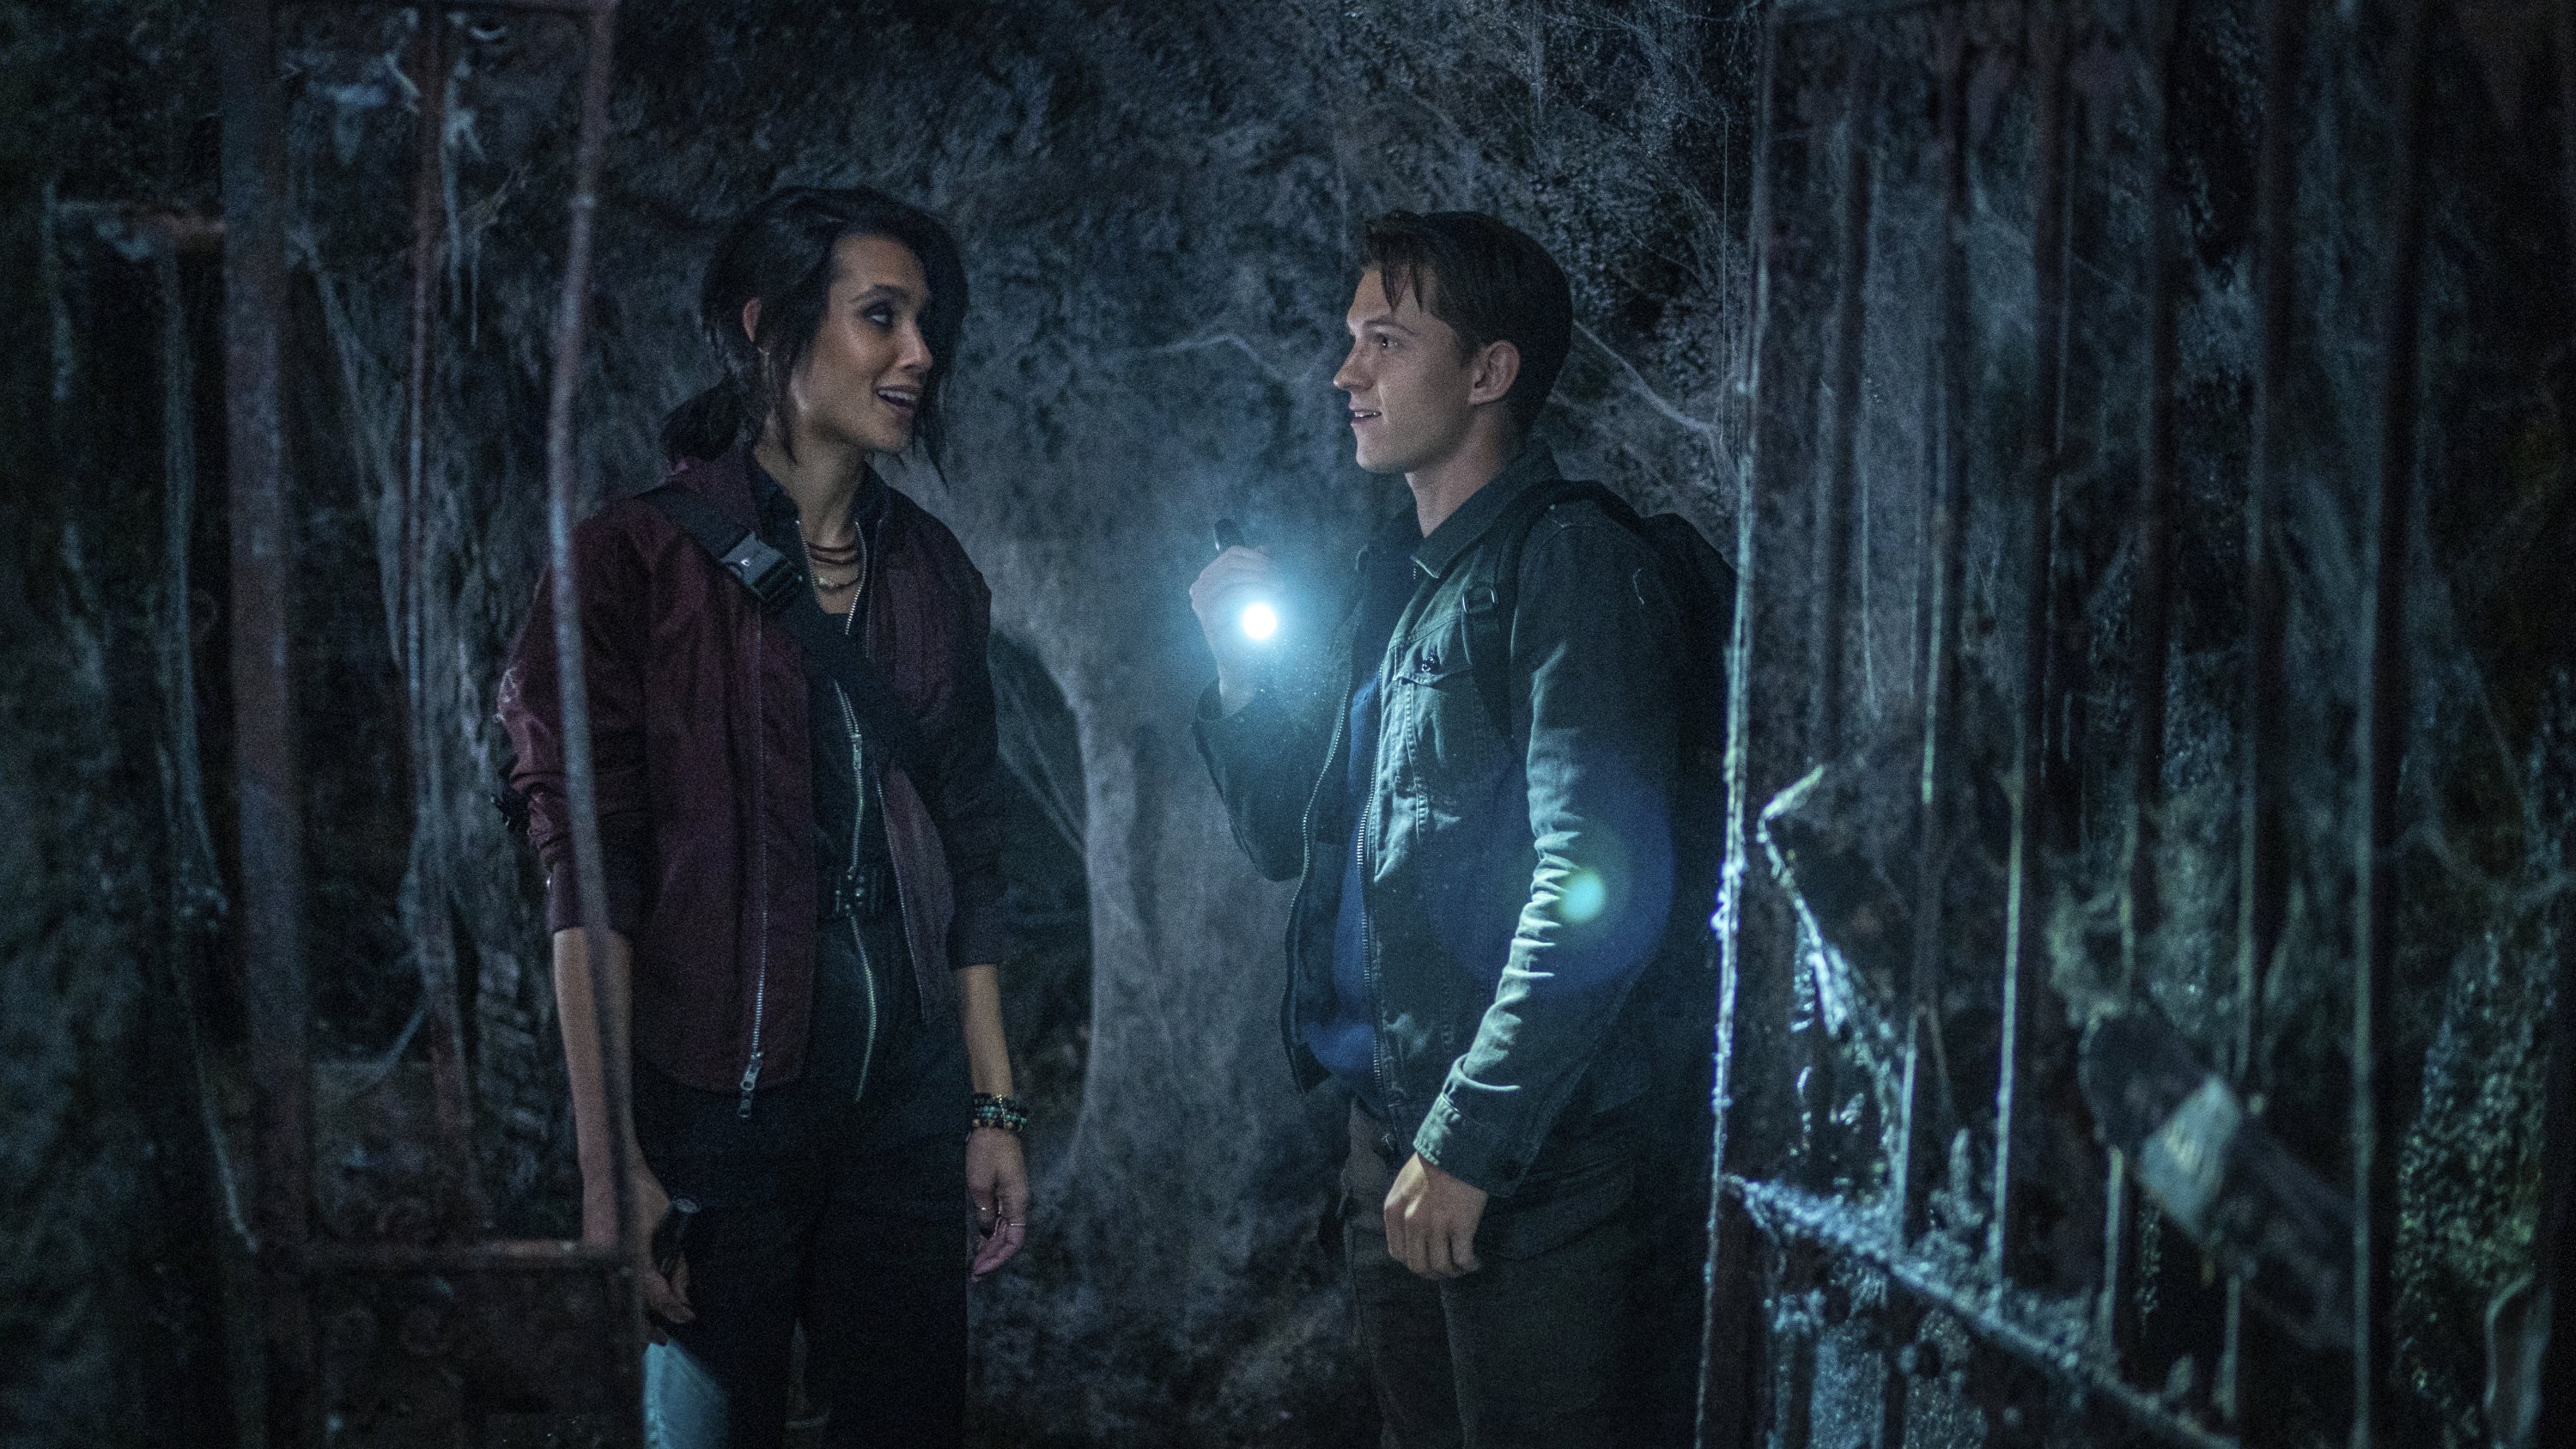 Sophia Taylor Ali (L) and Tom Holland appear in a scene from "Uncharted." (AP Photo)